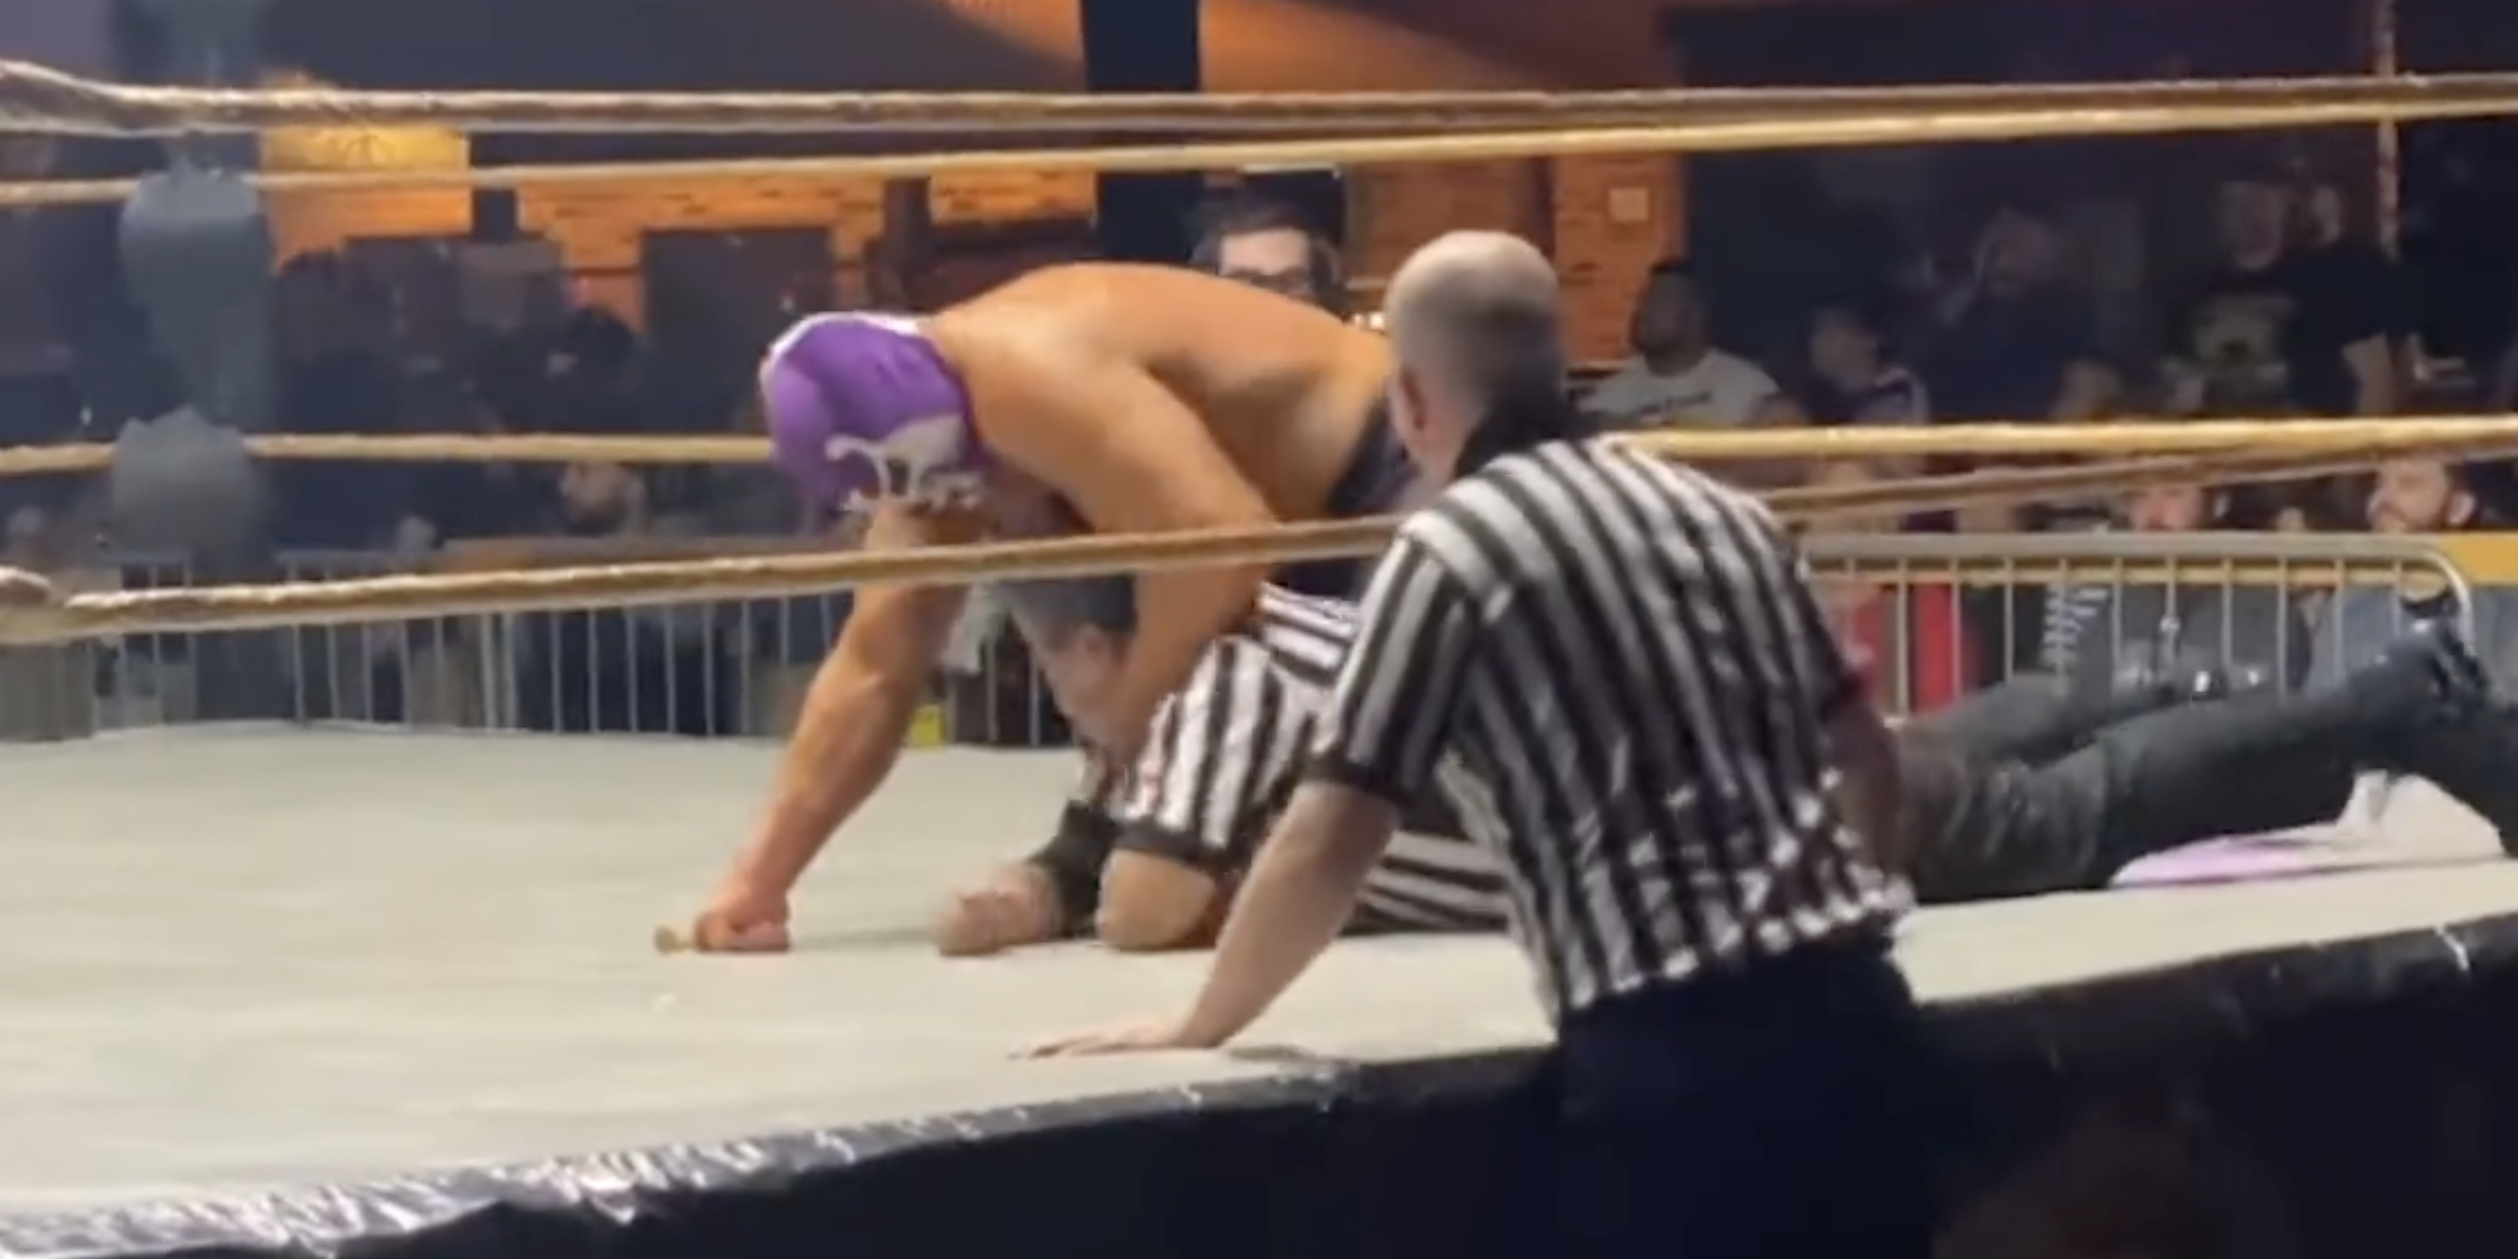 Wrestler Devon Nicholson attacks the referee in an incident at a Texas wrestling show